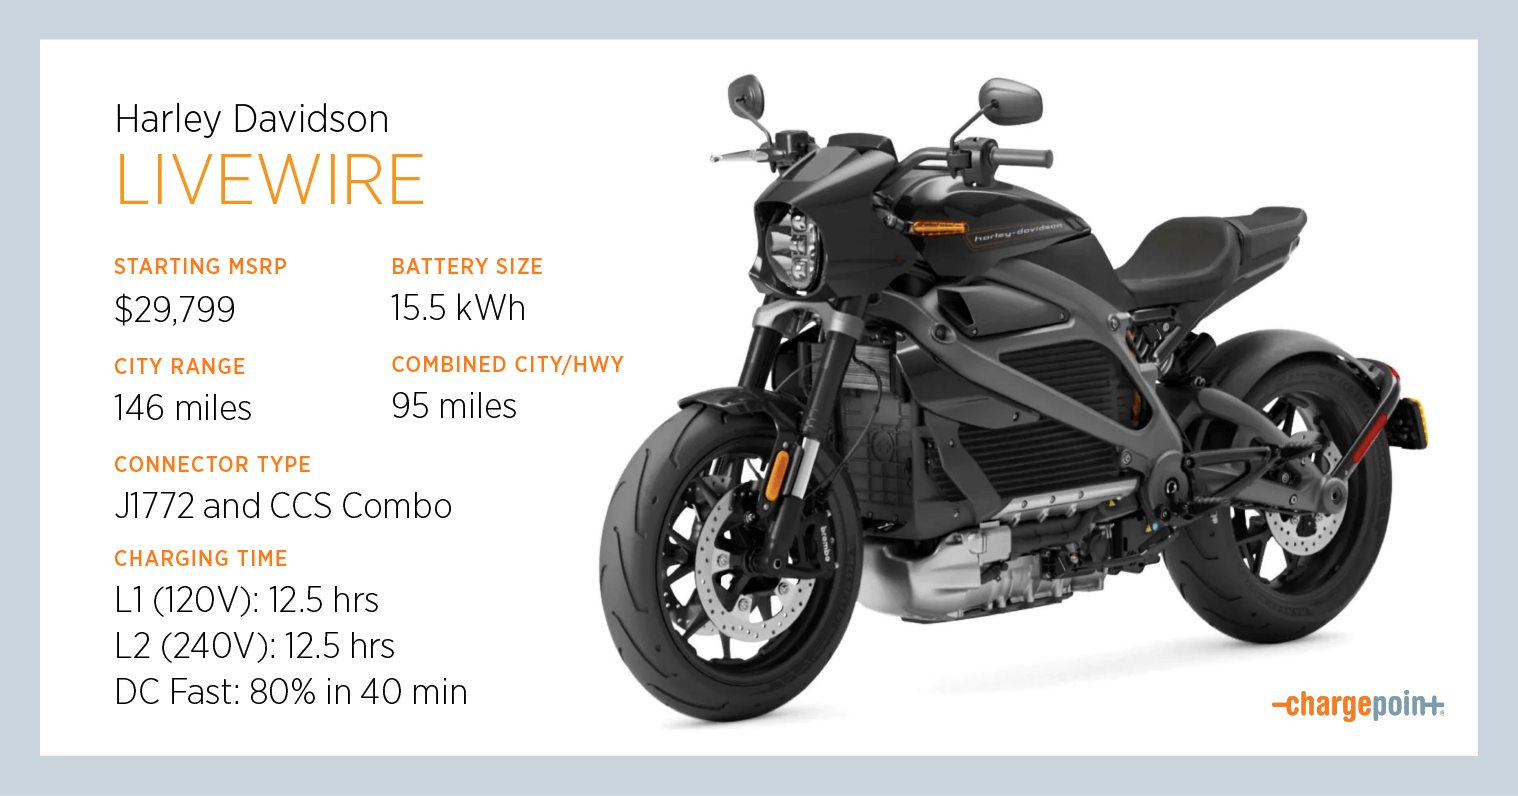 livewire motorcycle range Harley-davidson livewire electric motorcycle
ridden over 1,000 miles in